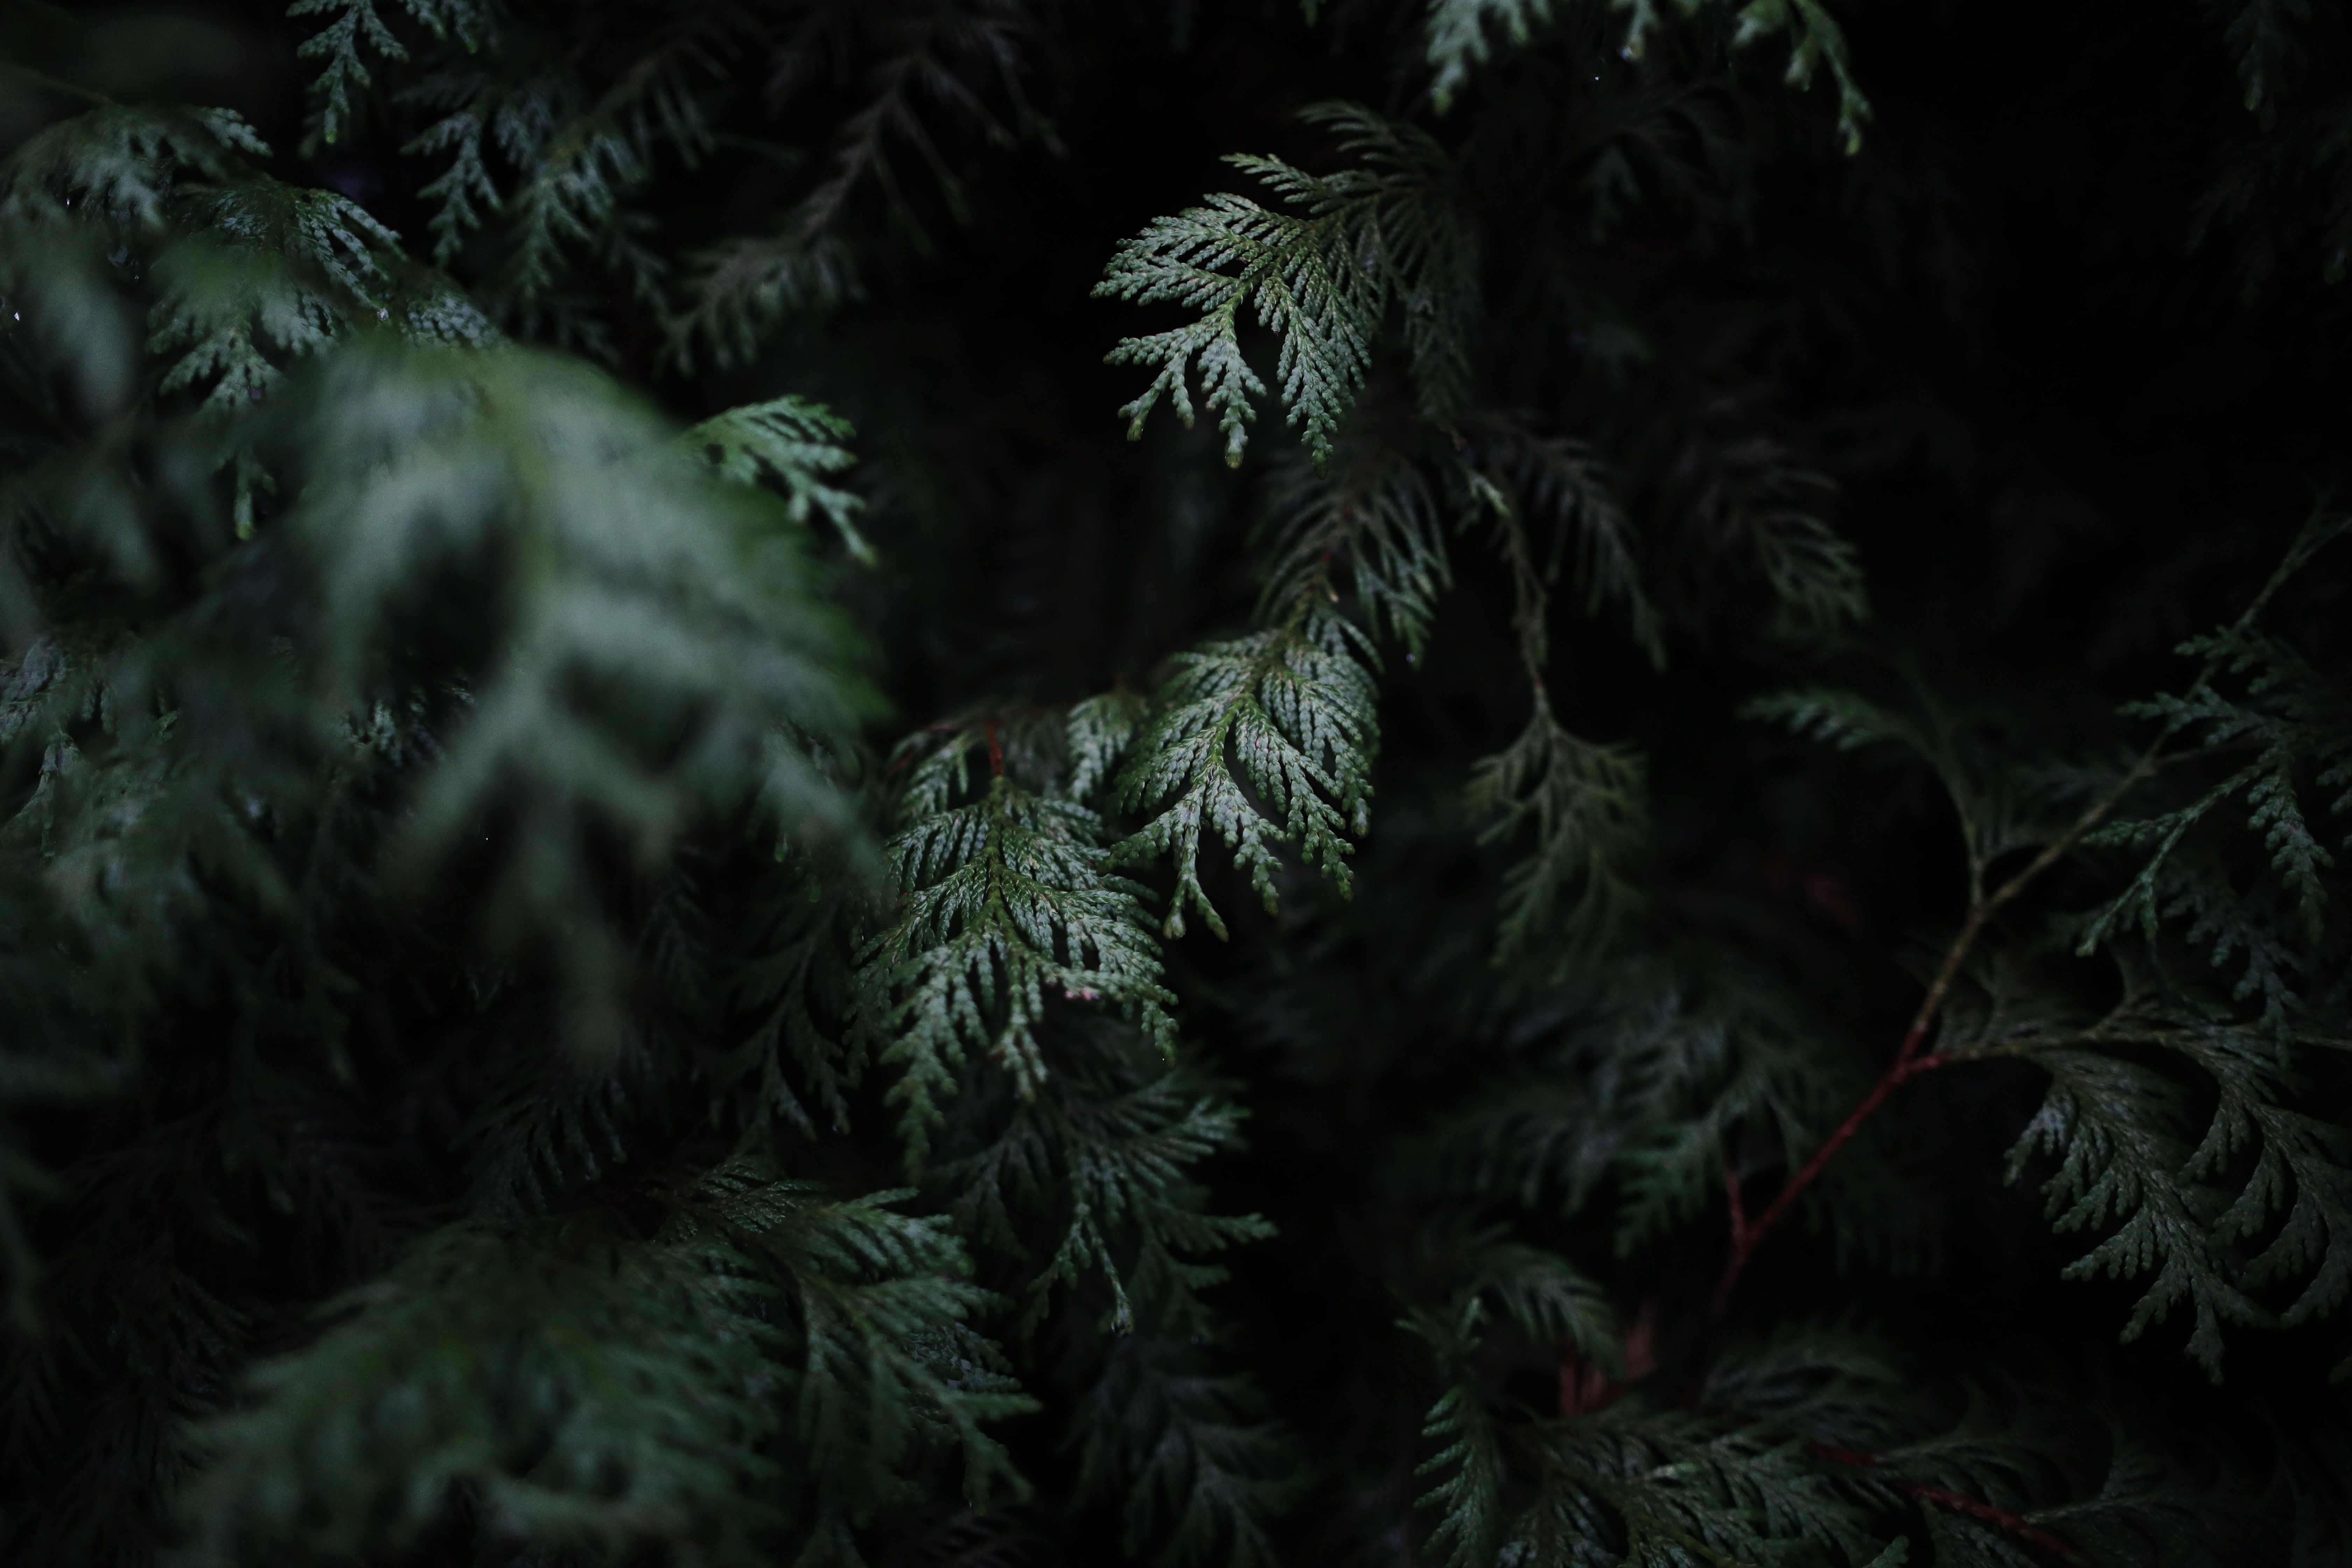 6720x4480 detail, forest, leafe, pine branch, green, PNG image, forest green, dark, texture, moody, pine, greenery, tree. Mocah.org HD Desktop Wallpaper